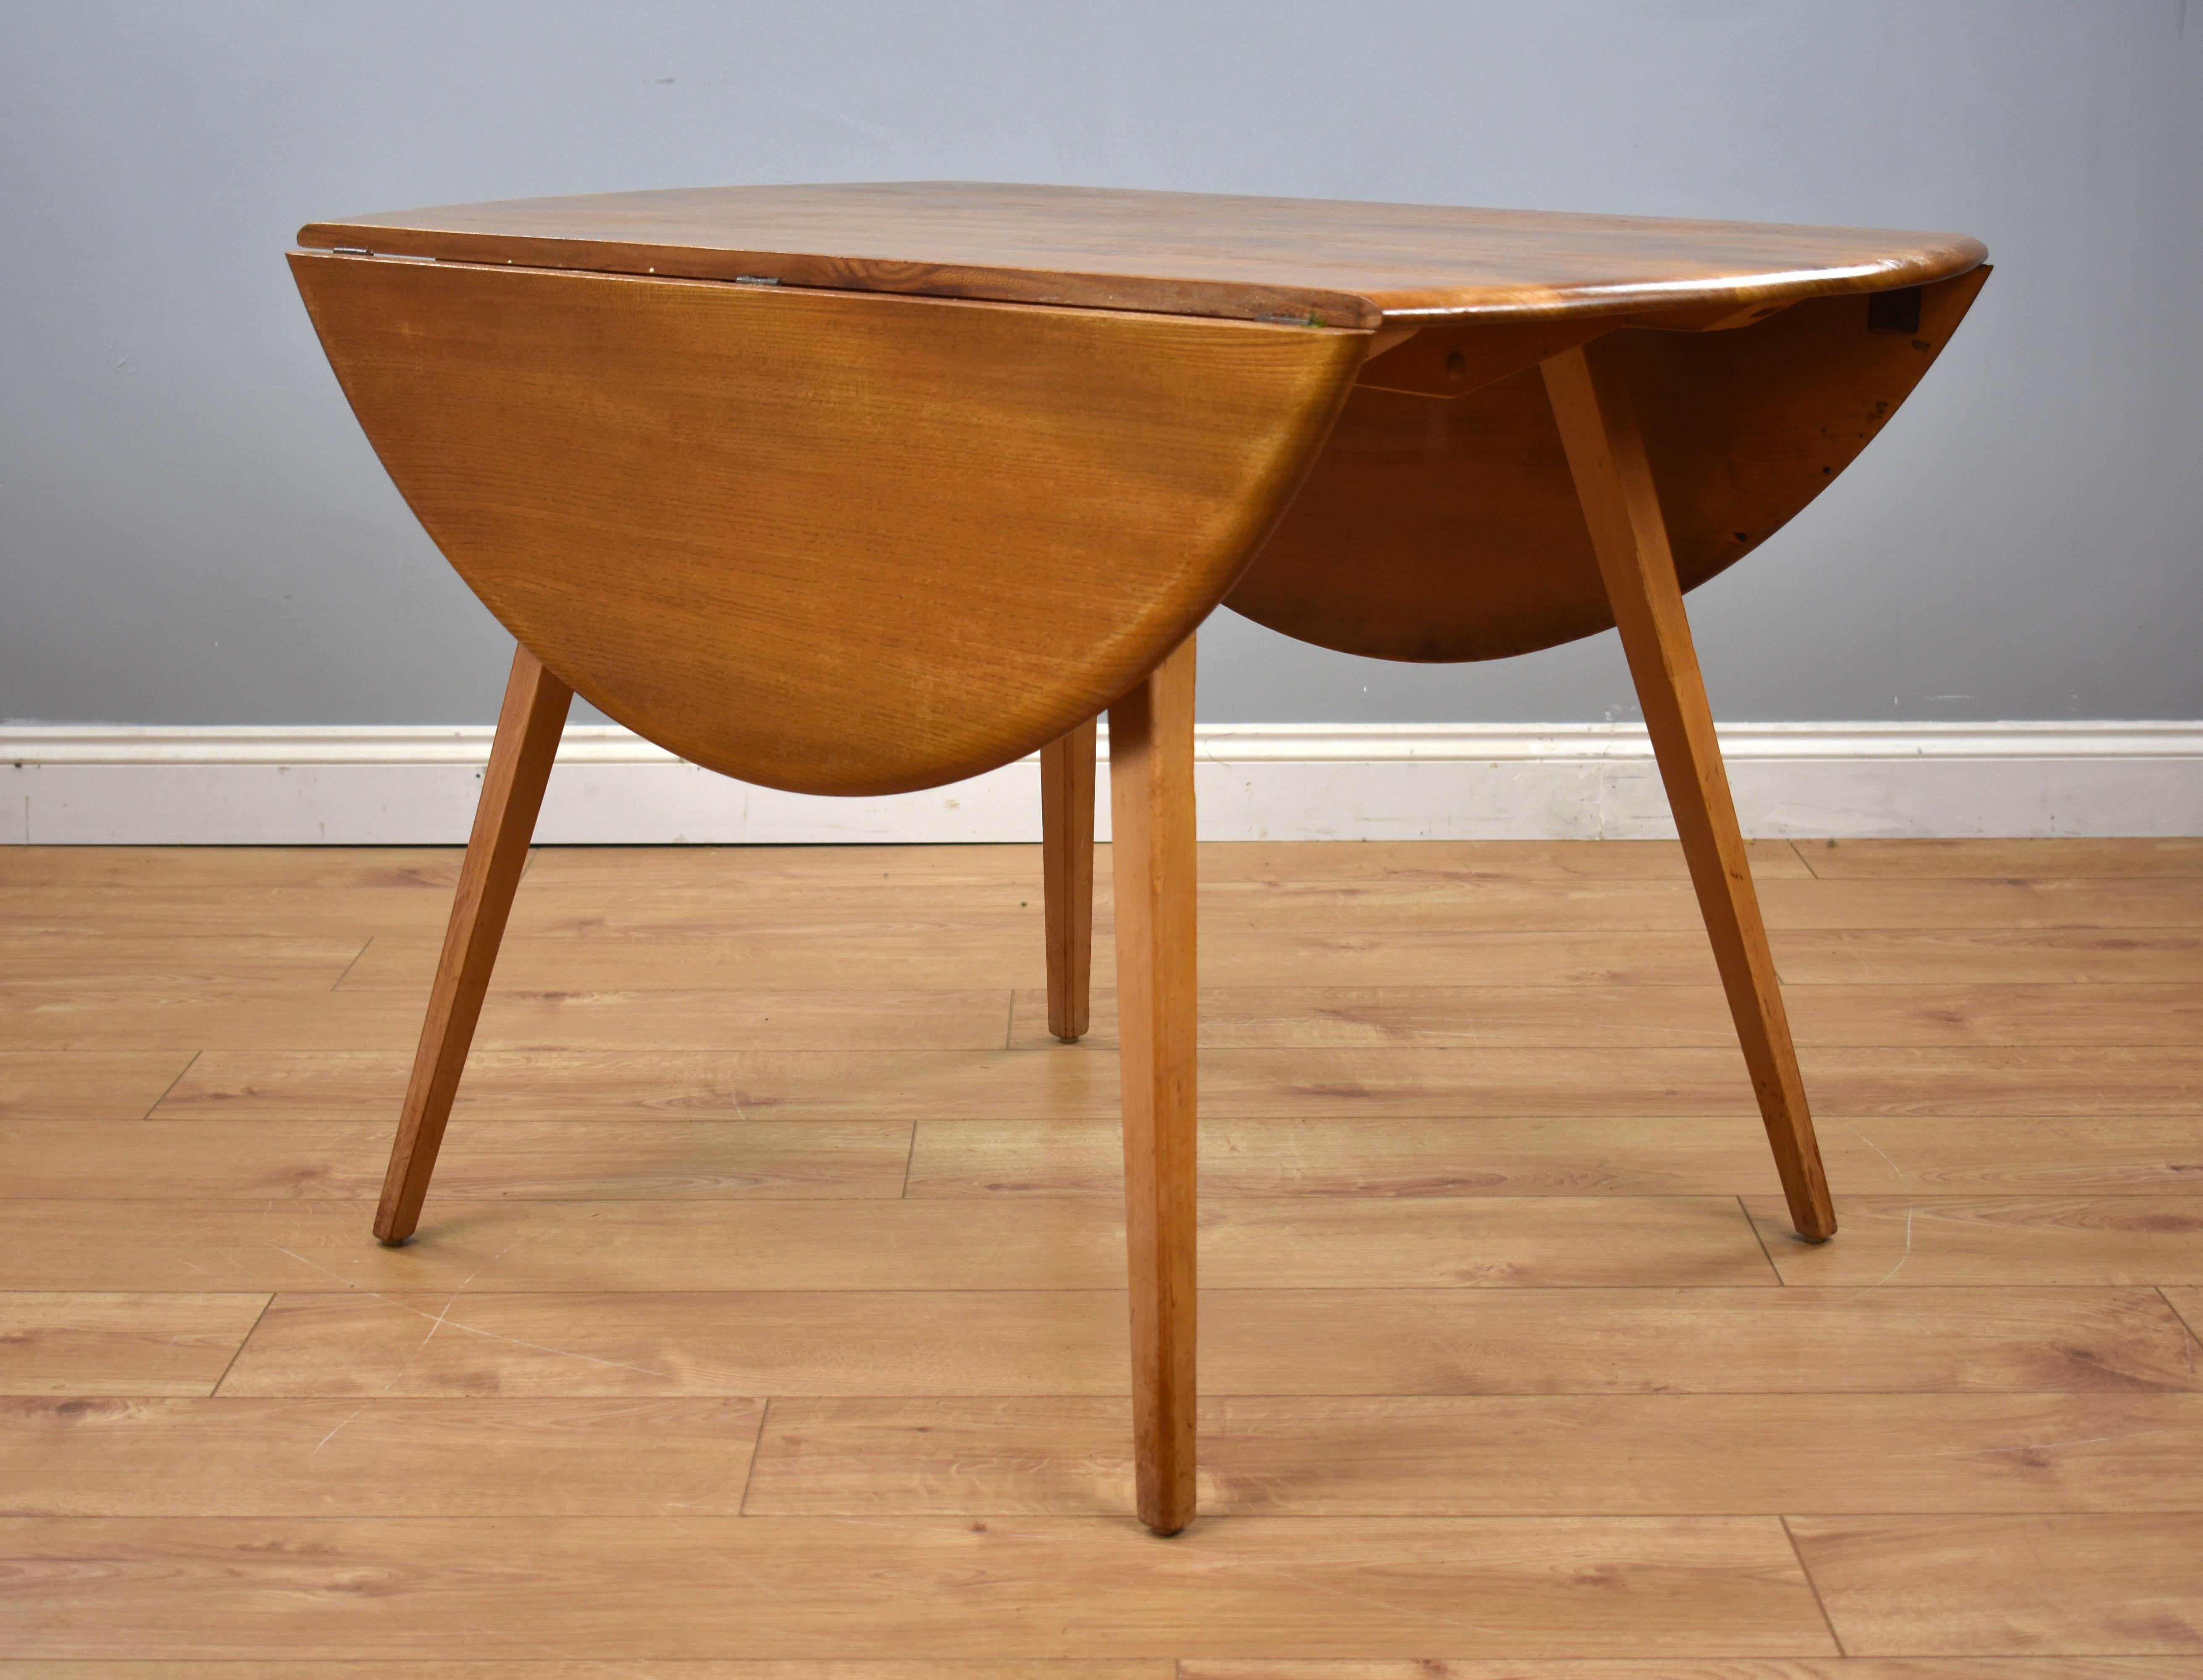 For sale is a midcentury Ercol elm dining table and 4 chairs. The elm dining table, model no. 384, having two drop leaves, standing on fine legs comes complete with four Ercol Quaker back dining chairs. The set is in very good condition for its age,